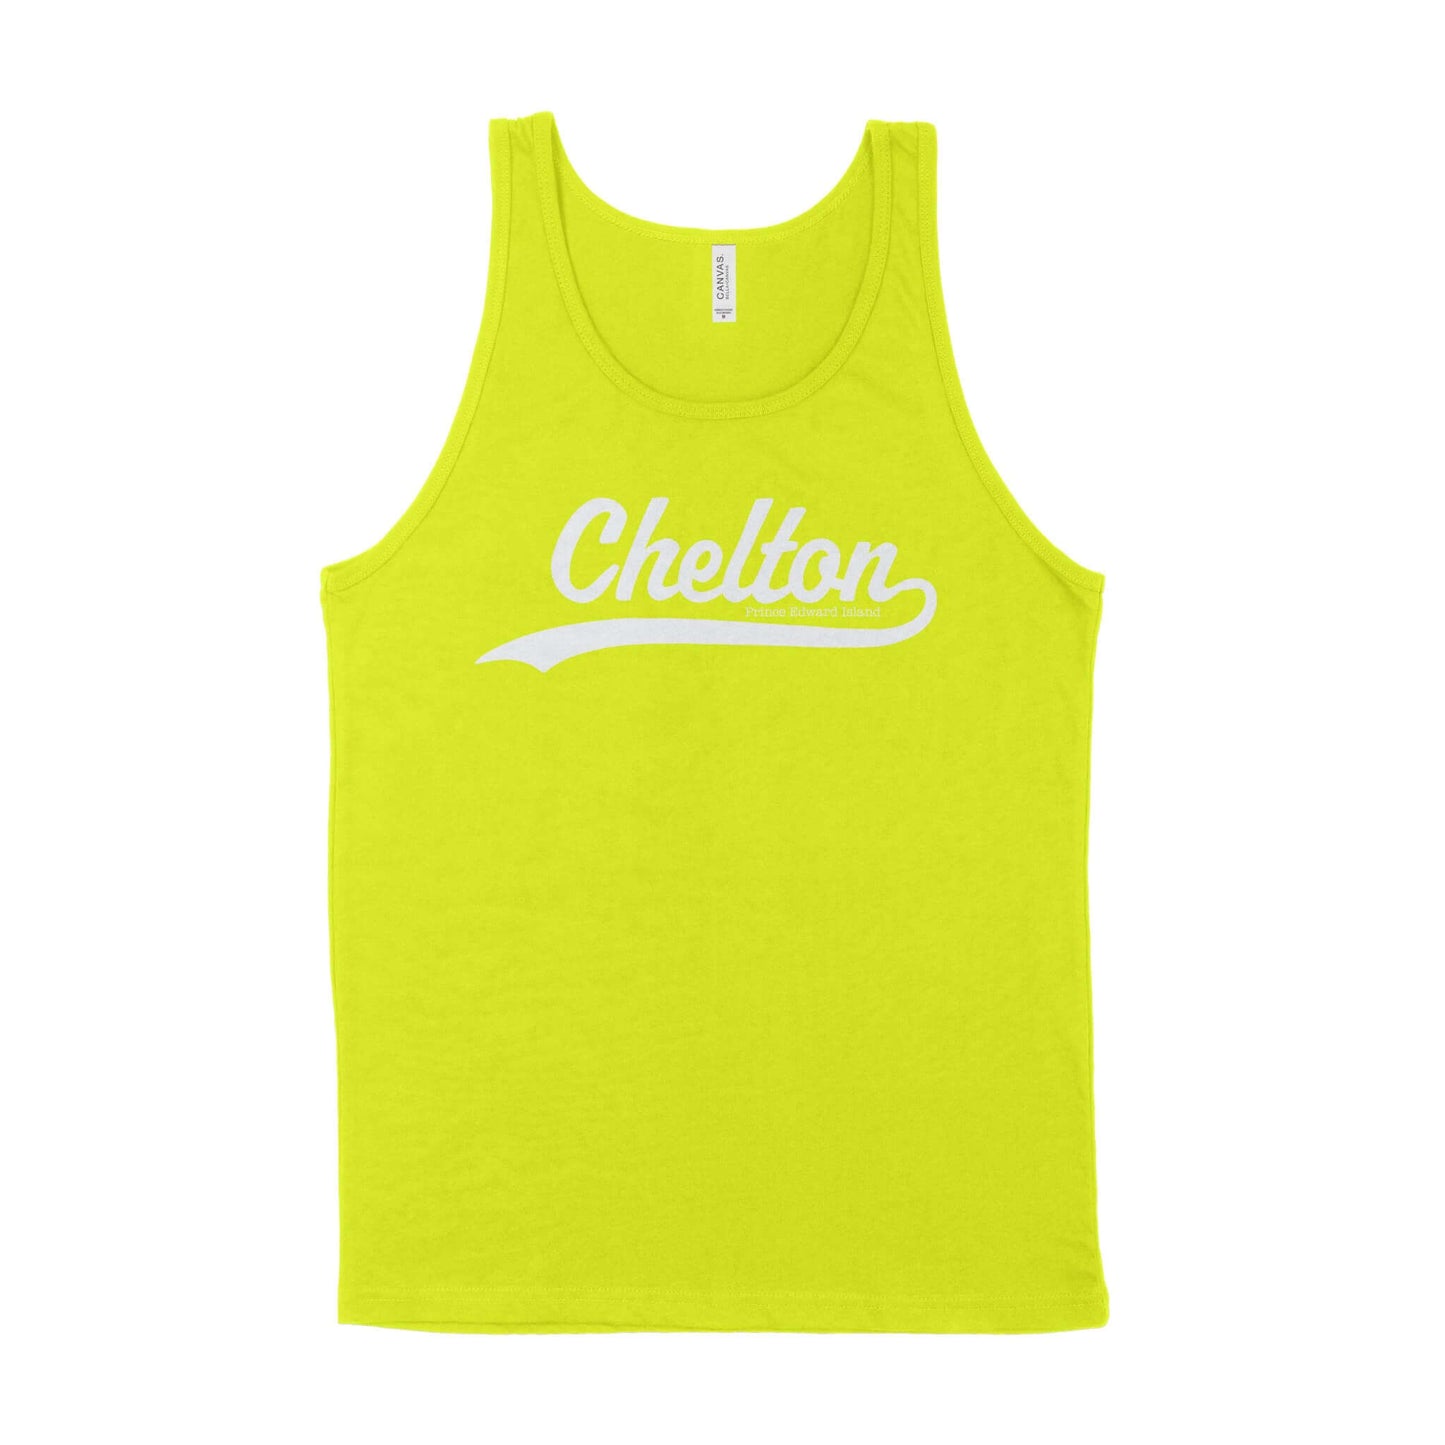 Chelton Unisex Tank Top from East Coast AF Apparel